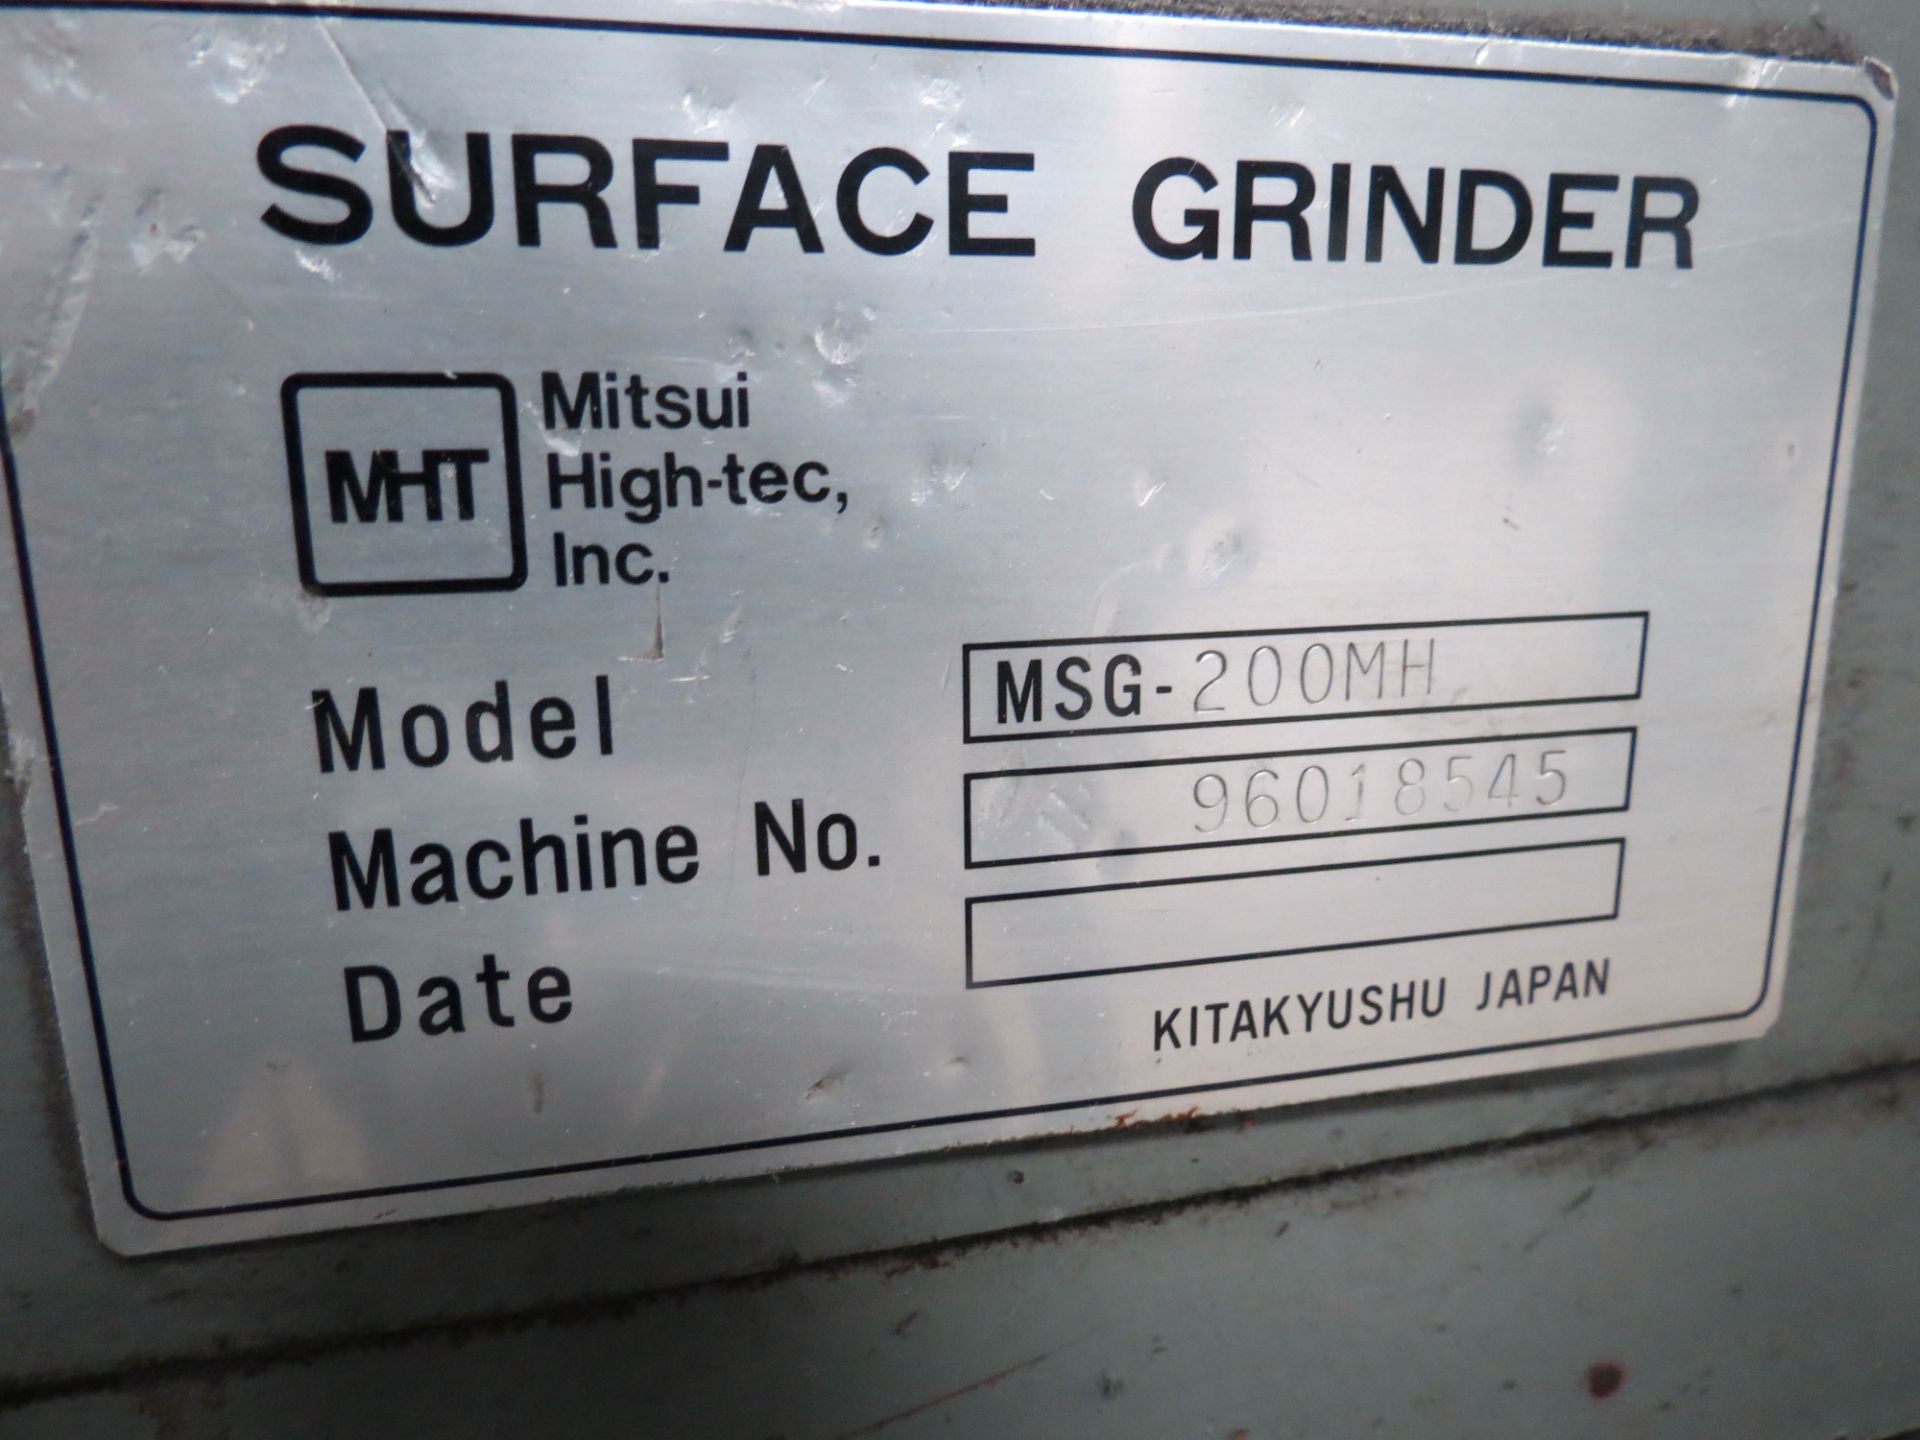 Mitsui High-tec Grinder, MSG-200MH, Serial 96018545 - Image 5 of 6